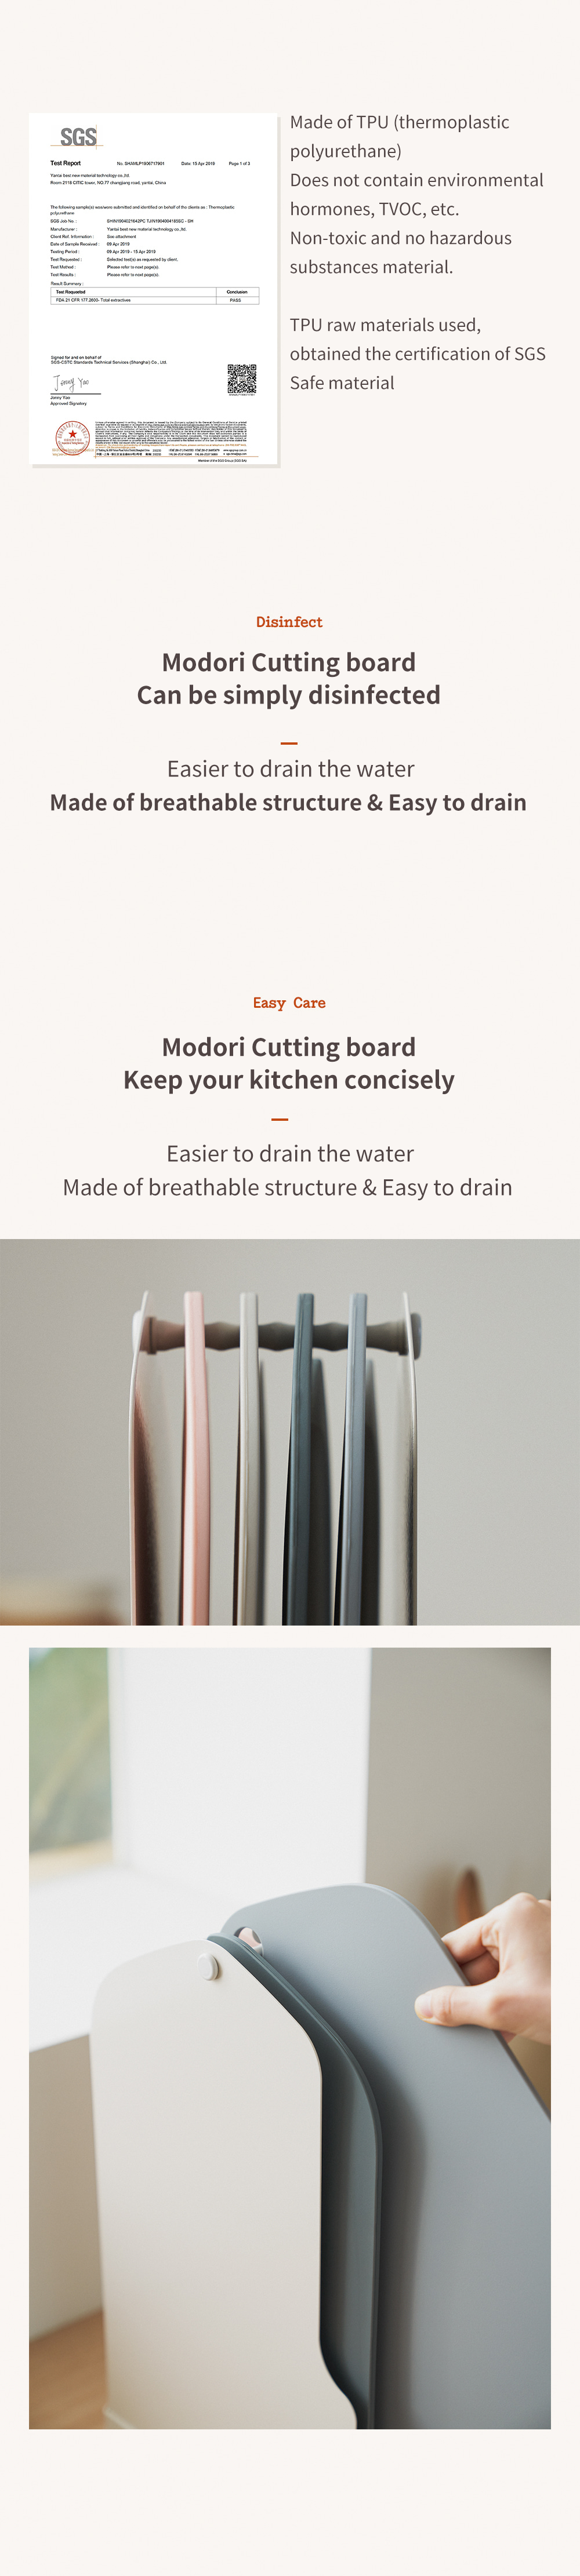 Modori Cutting Board Set (4 Colours) Non-toxic TPU Flexible Scratch Resistant Cutting Board. TPU cutting board is scratch-resistant and has low maintenance. It has an anti-slippery surface preventing food from clicking. | BPA Free, Eco-Friendly | SGS Safety, Quality Approved, Made in Korea | Easy to wash and clean - just pour boiled water and dry | Less knife marks, flexible, great abrasion and durability. Modori cookware collection features functional designs and minimalist colours that will fit in any kitchen. Modori is the key to designing your dream kitchen.